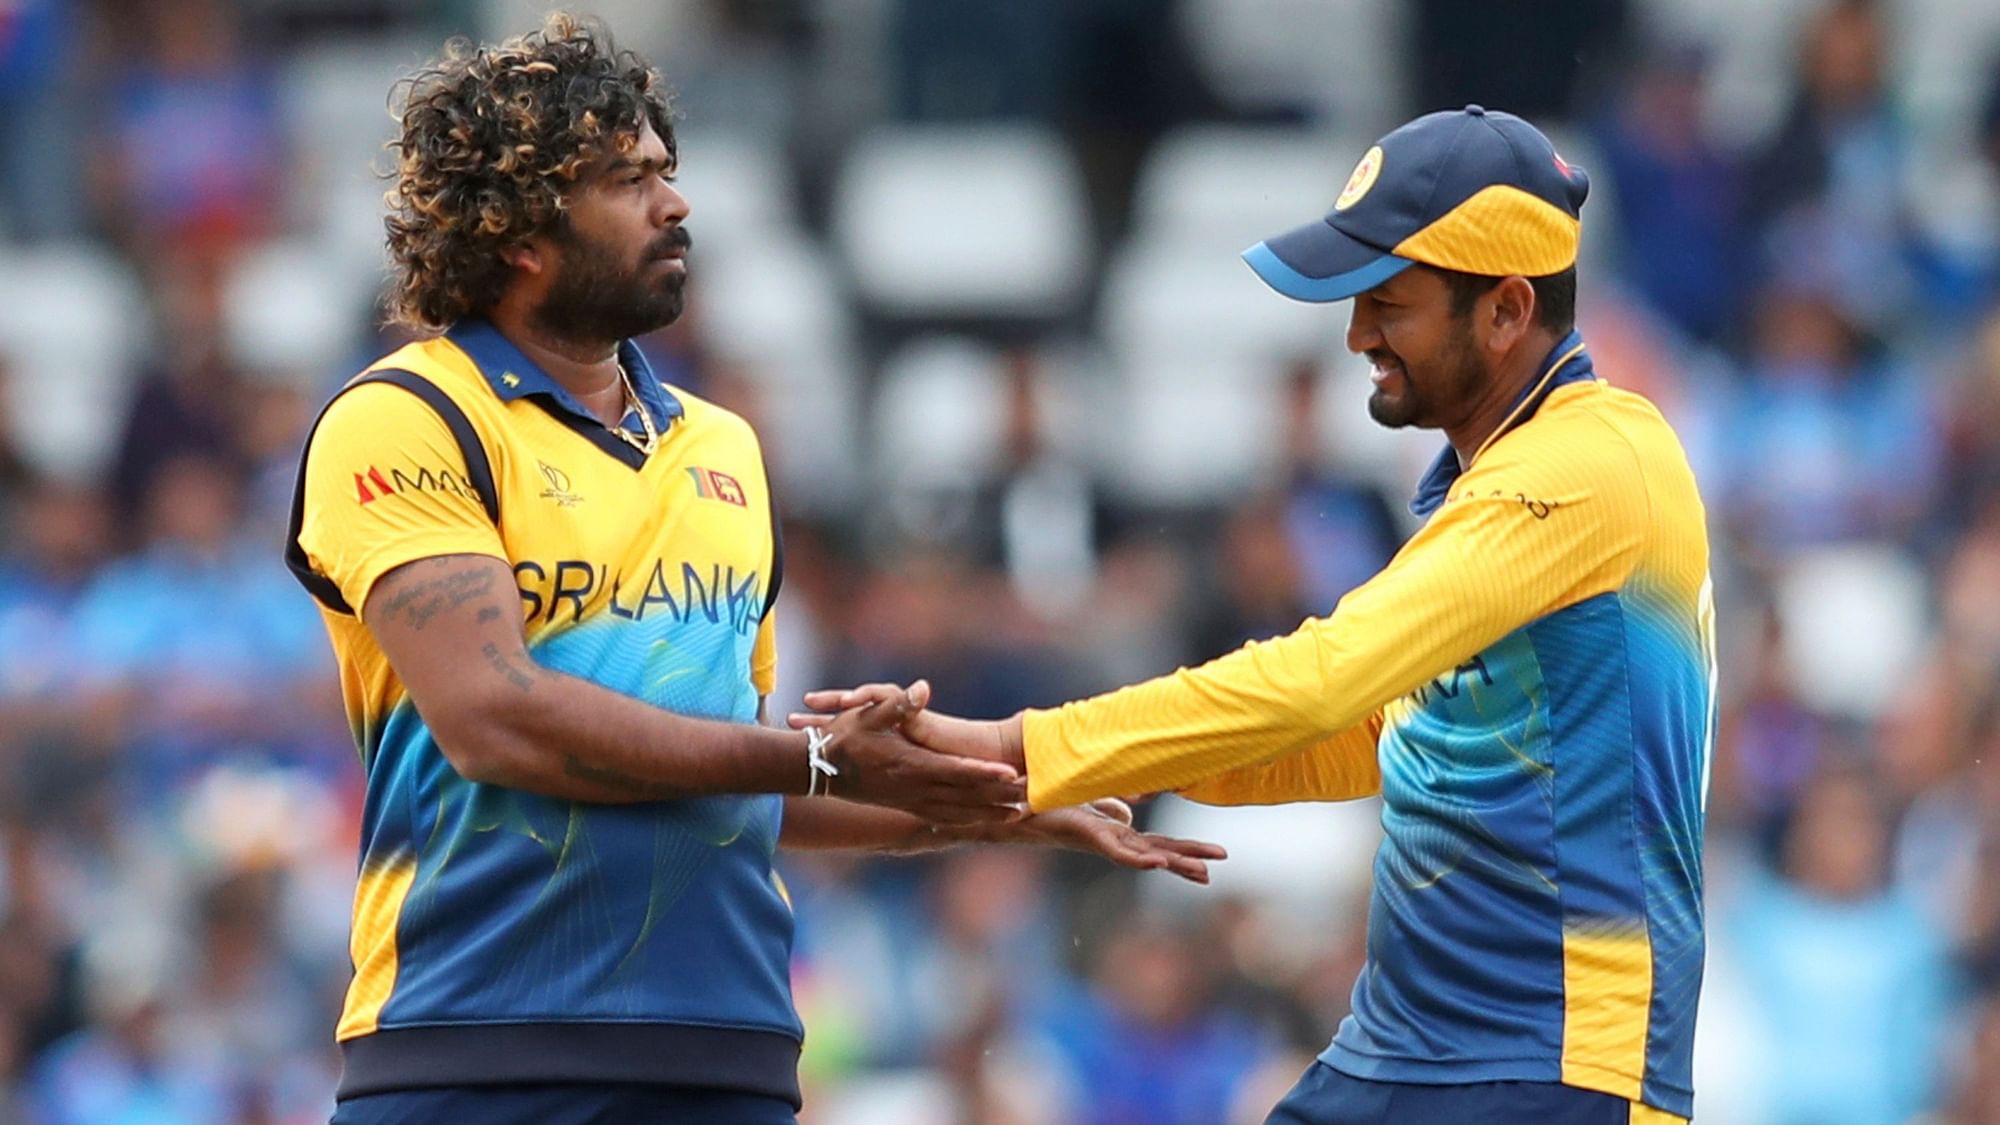 Lasith Malinga finished as the third-highest wicket taker in World Cup history with 56 scalps.